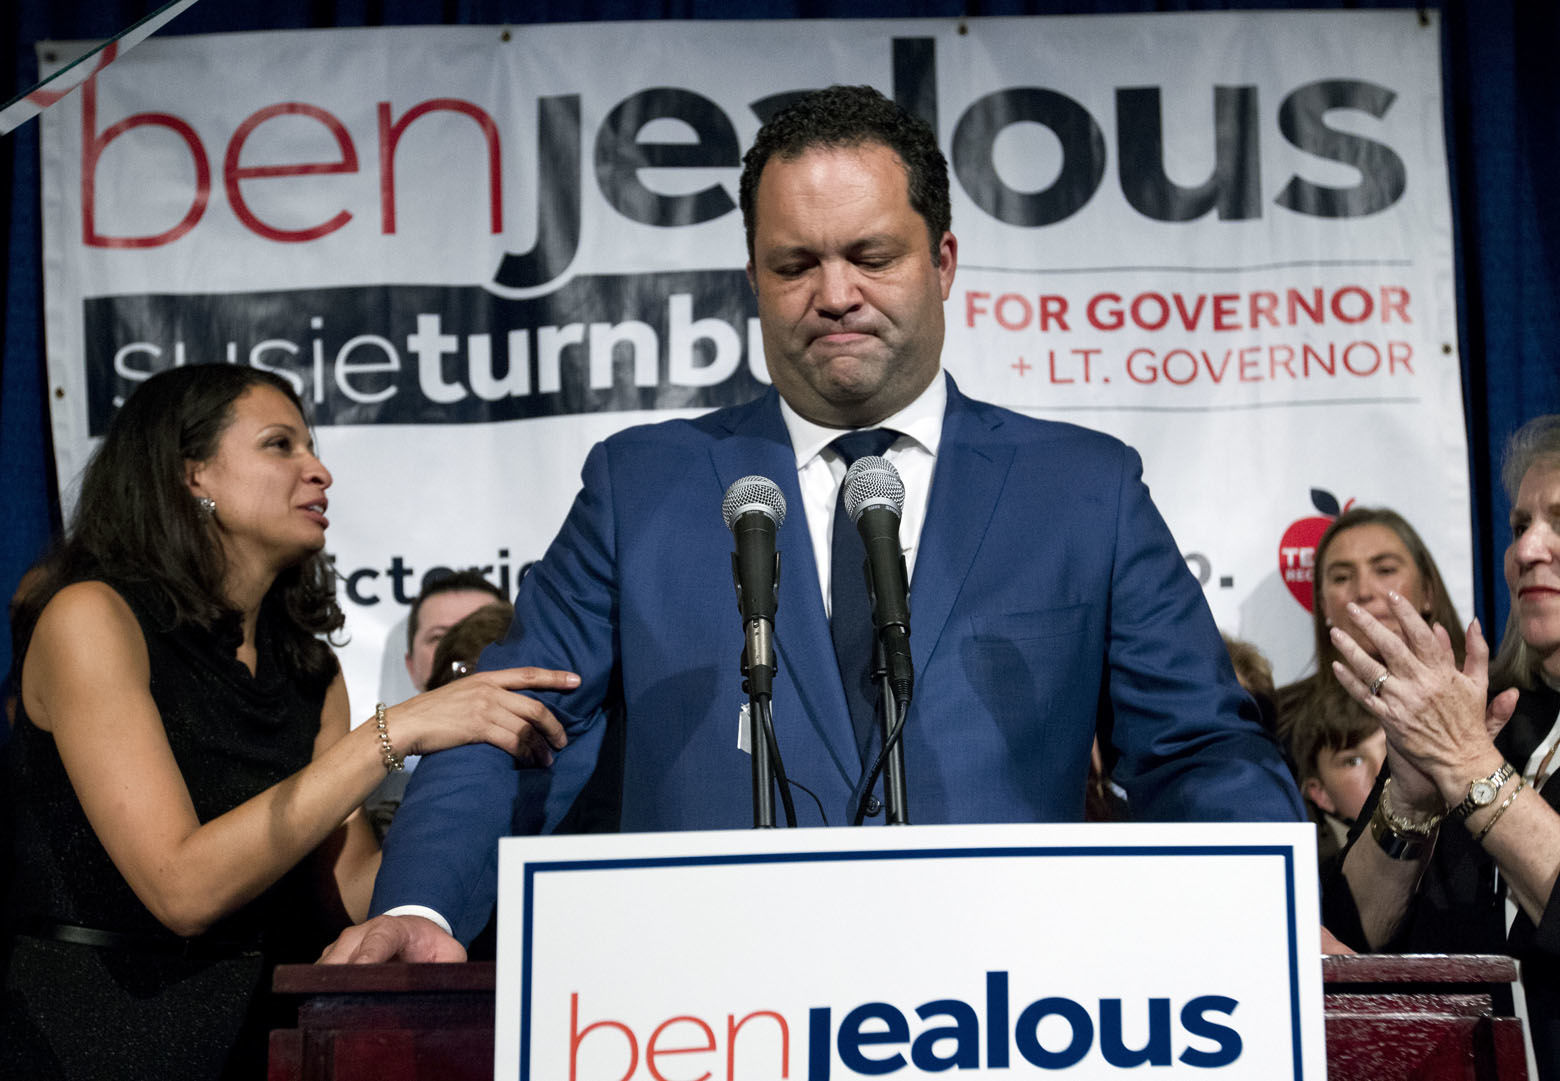 Maryland Democratic gubernatorial candidate Ben Jealous speaks to supporters at an election night party in Baltimore, Md., after conceding to Maryland Gov. Larry Hogan, Tuesday, Nov. 6, 2018. (AP Photo/Jose Luis Magana)